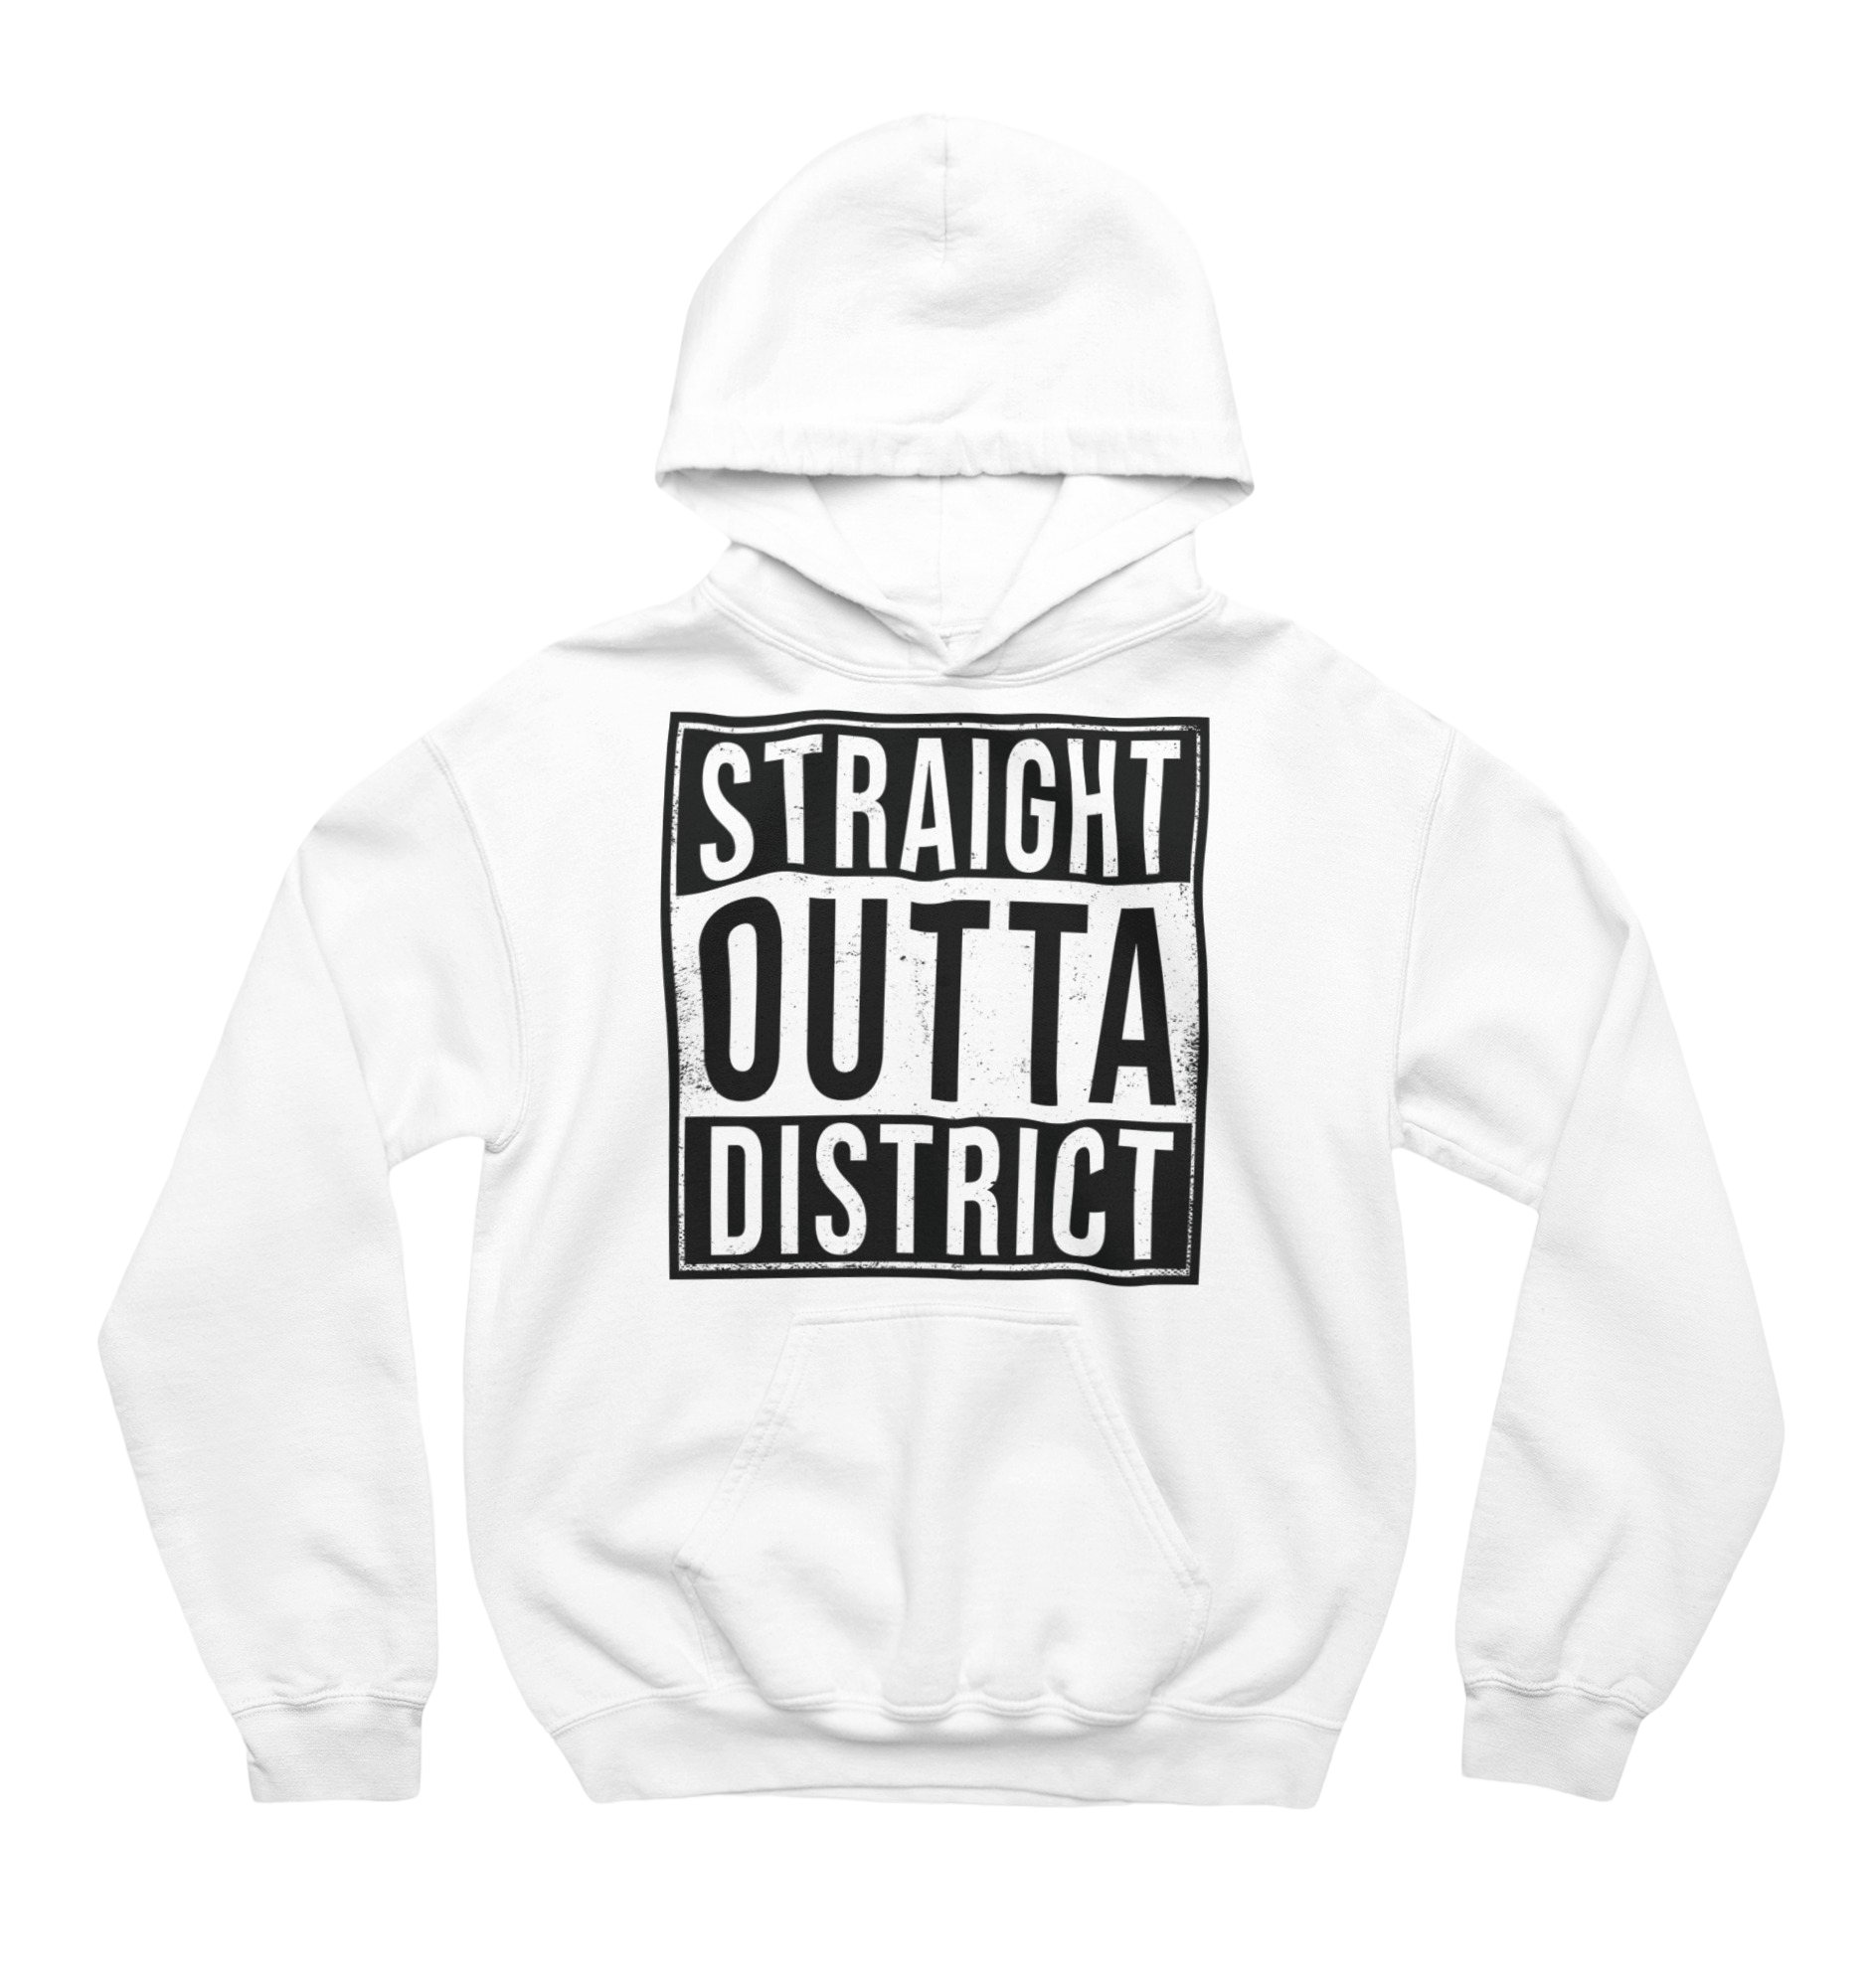 Outta District Hoodie - 0